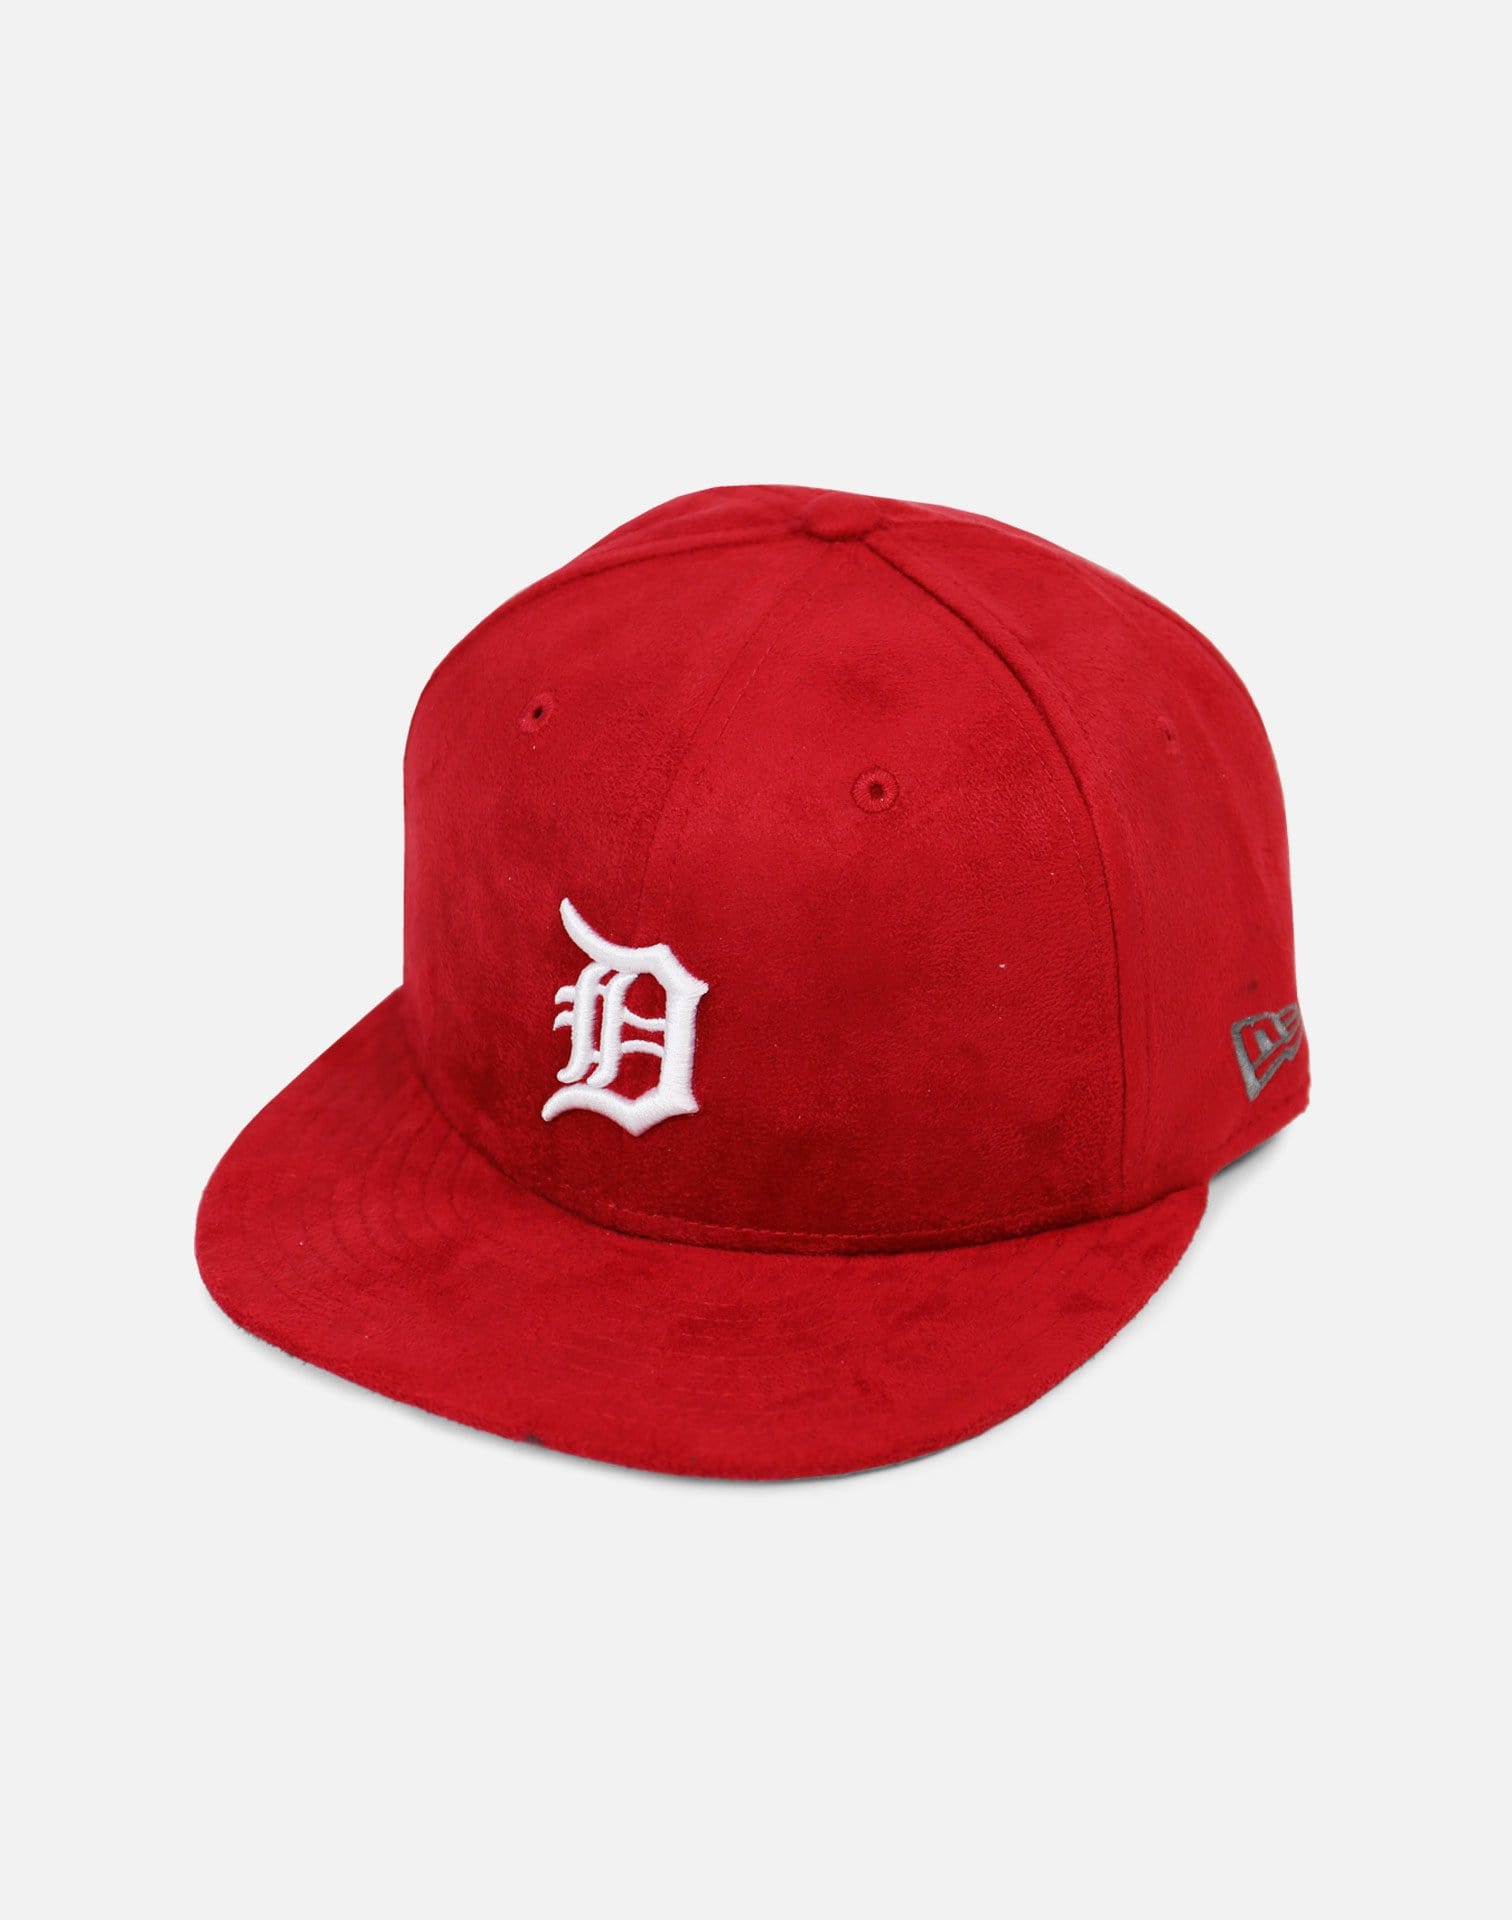 New Era Detroit Tigers Suede Snapback Hat (Red)